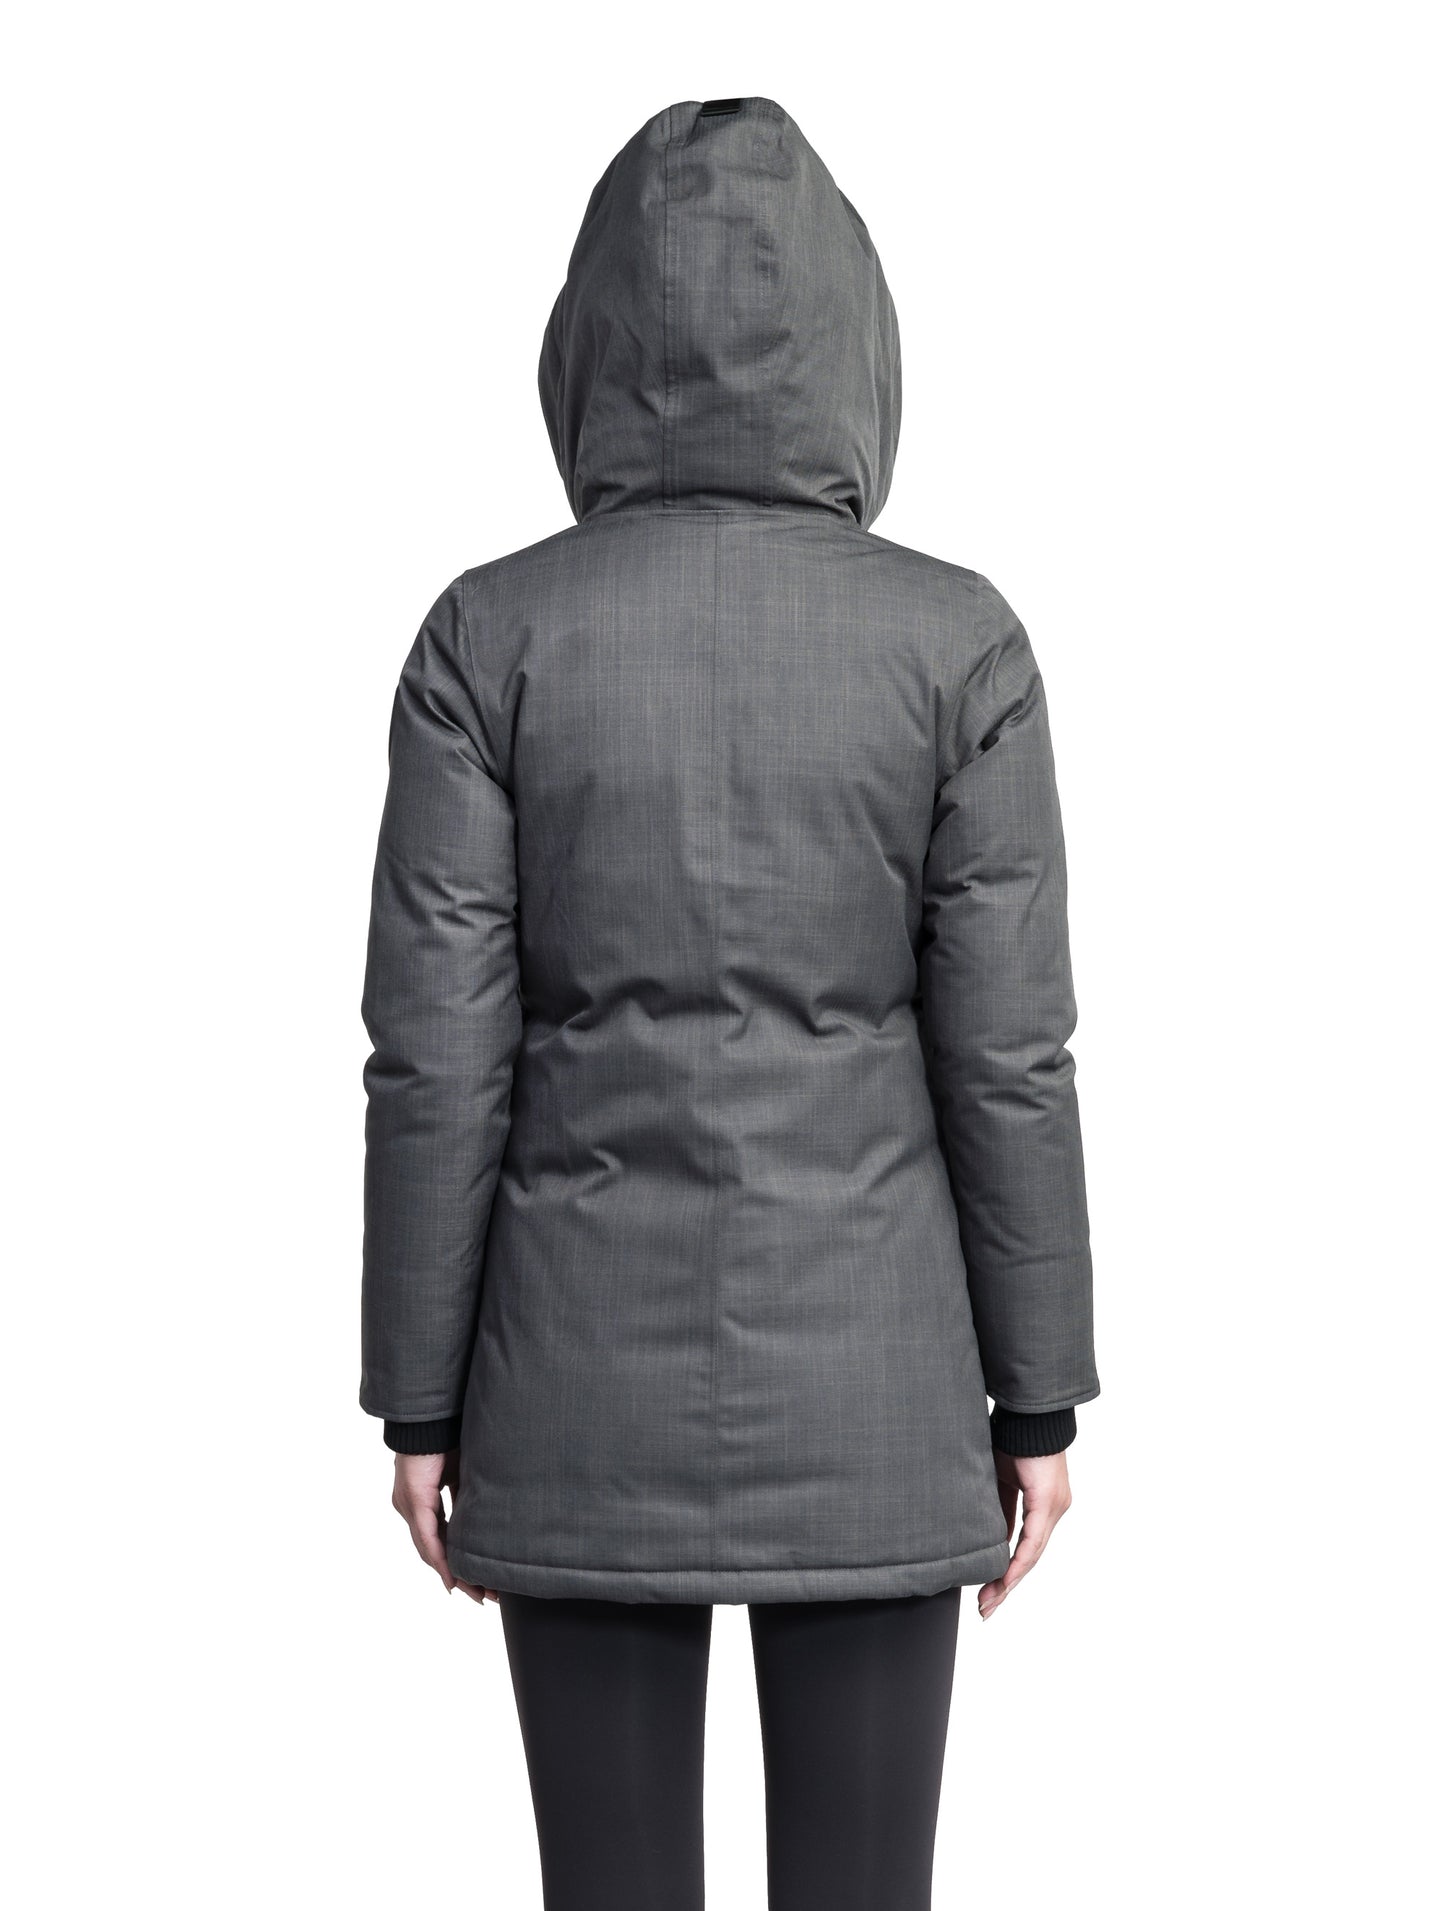 Carla Furless Ladies Parka in thigh length with Canadian Premium White Duck Down insulation, non-removable hood, centre-front zipper with magnetic closure wind flap, and four exterior pockets, in Steel Grey